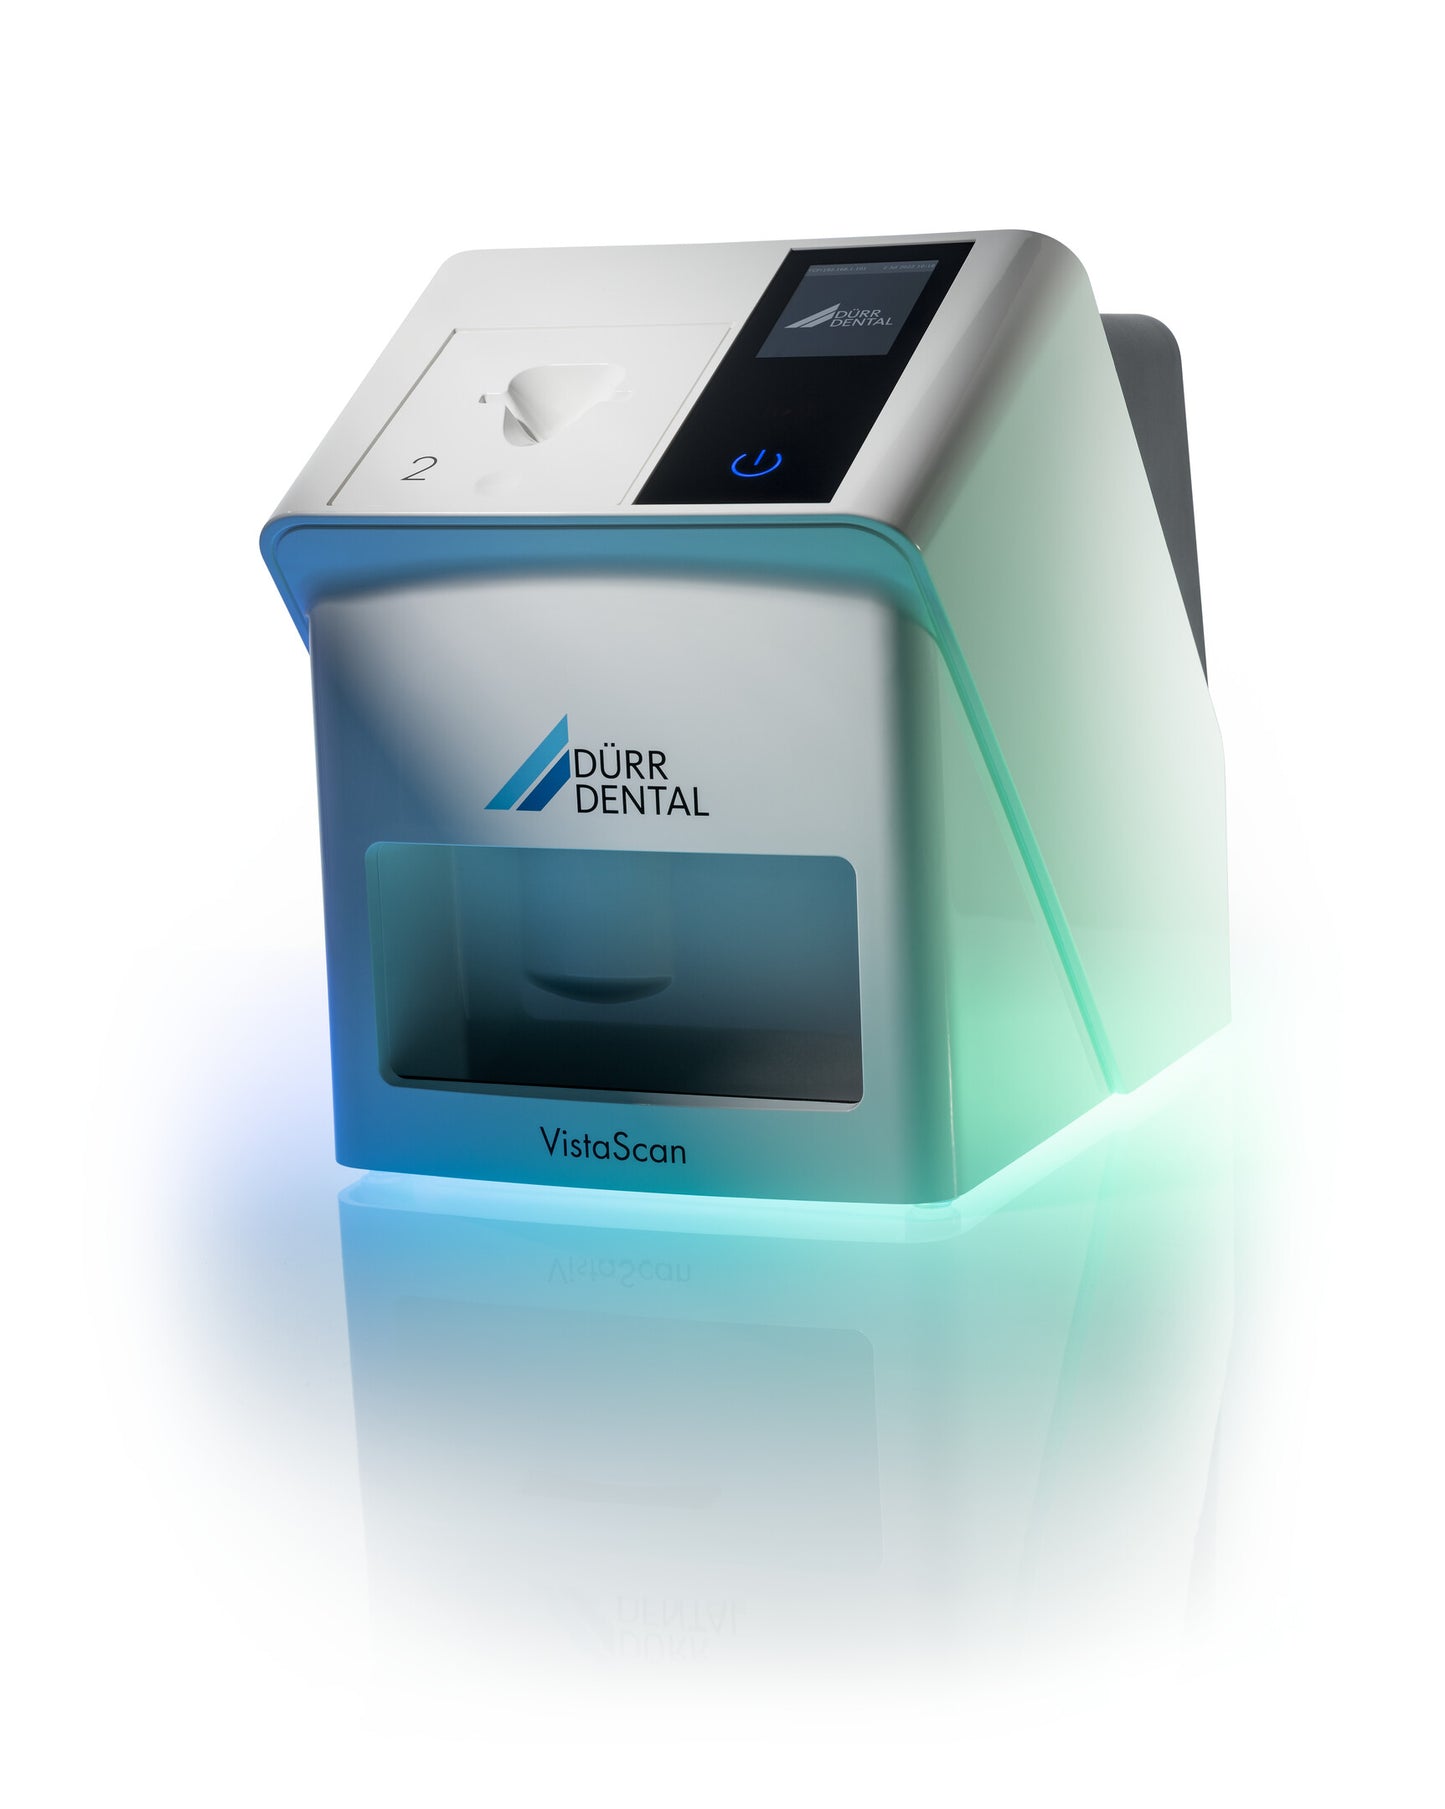 VistaScan Mini Easy 2.0 – the latest generation of image plate scanner